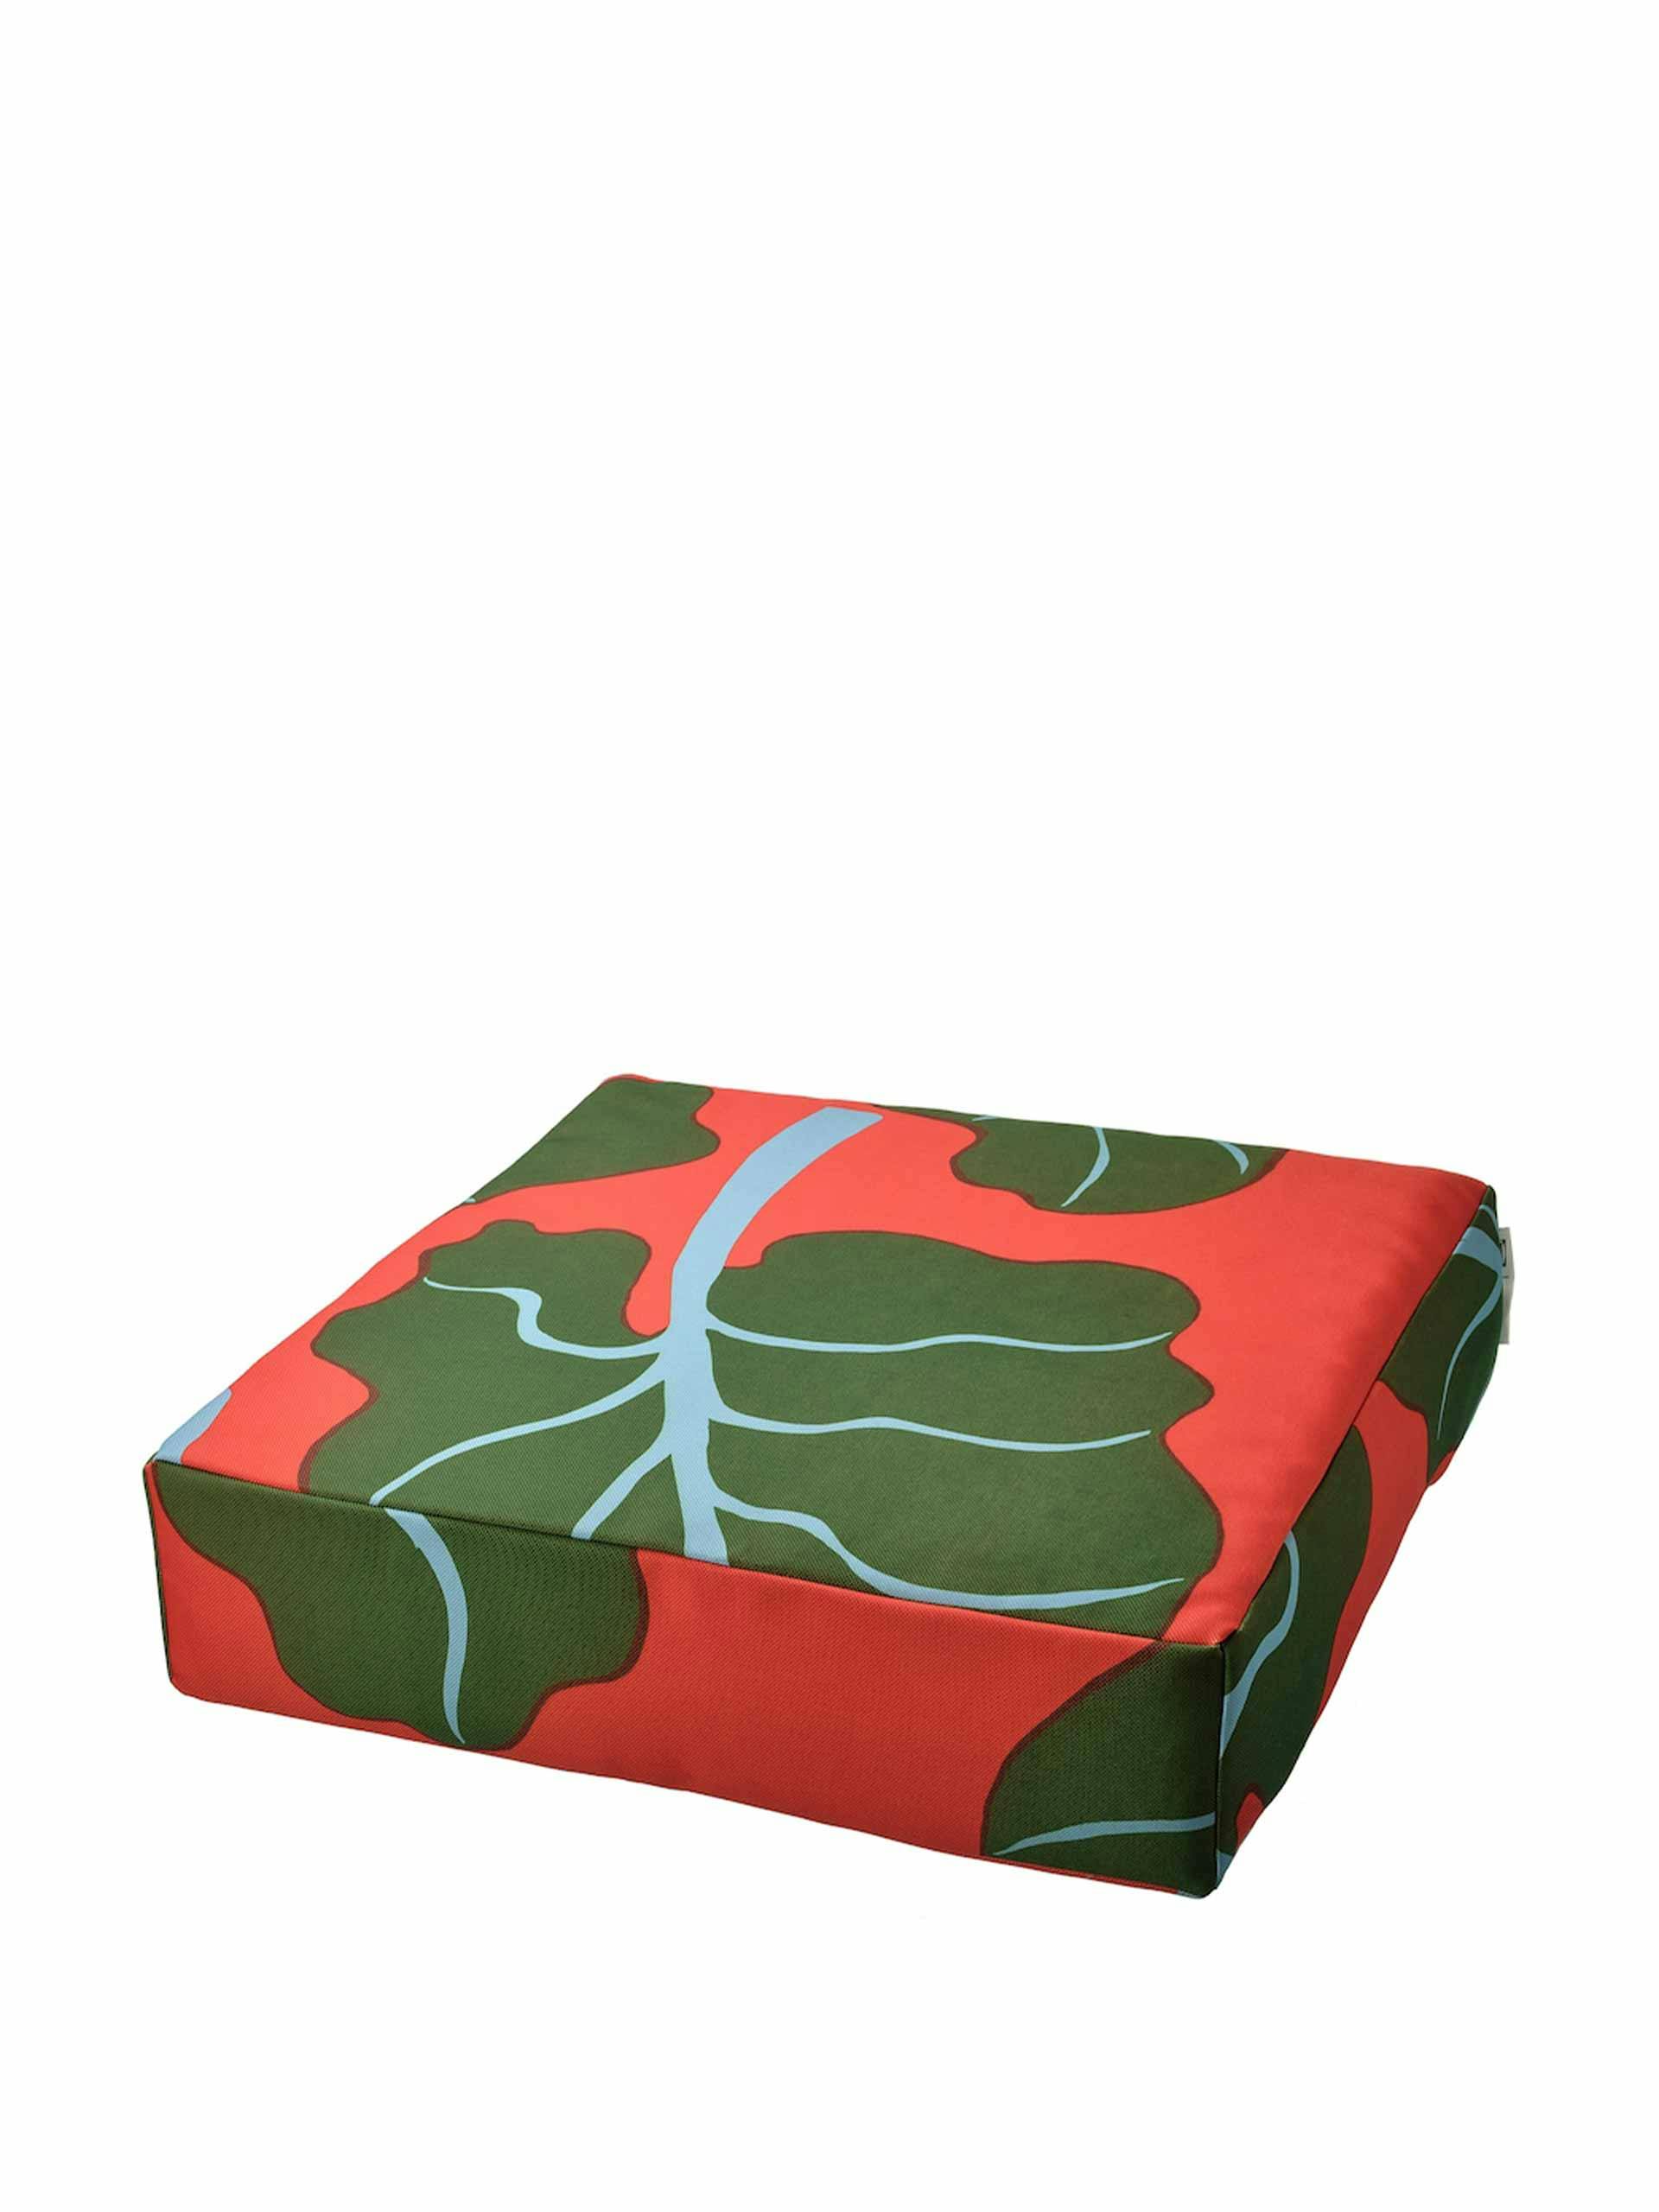 Red and green floor cushion